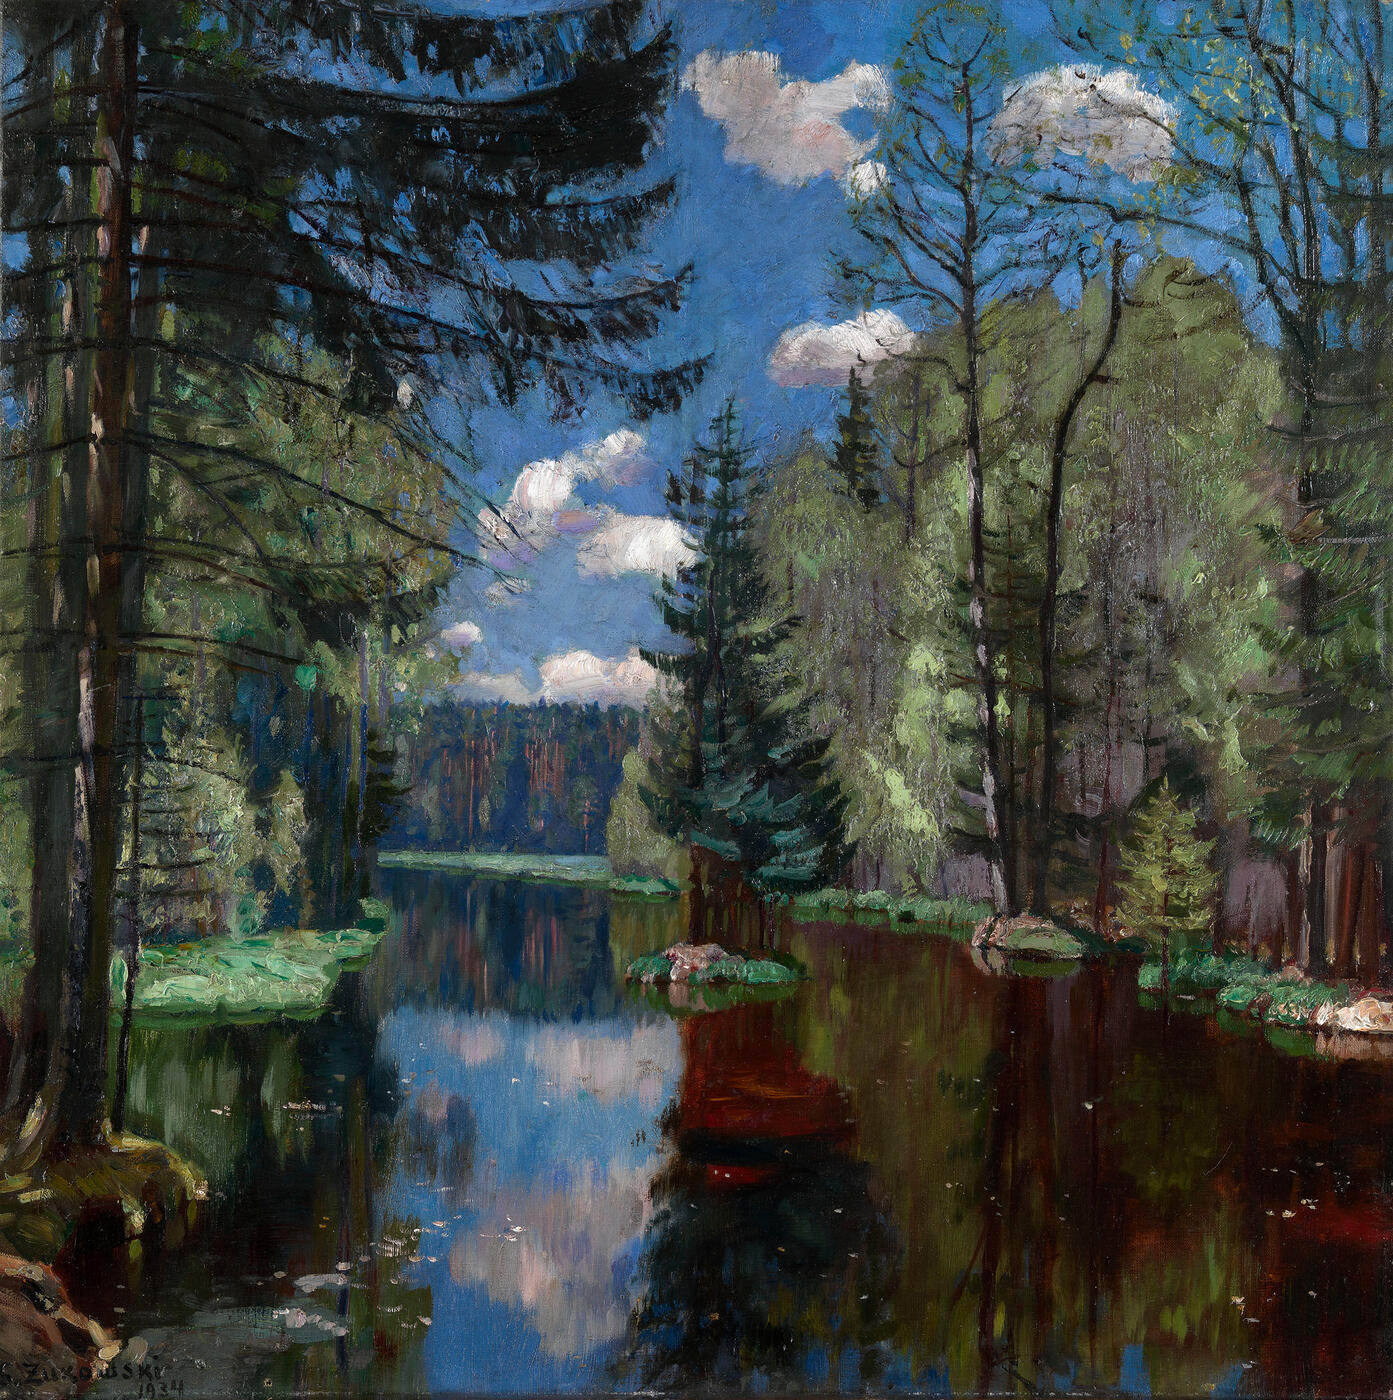 Forest Lake